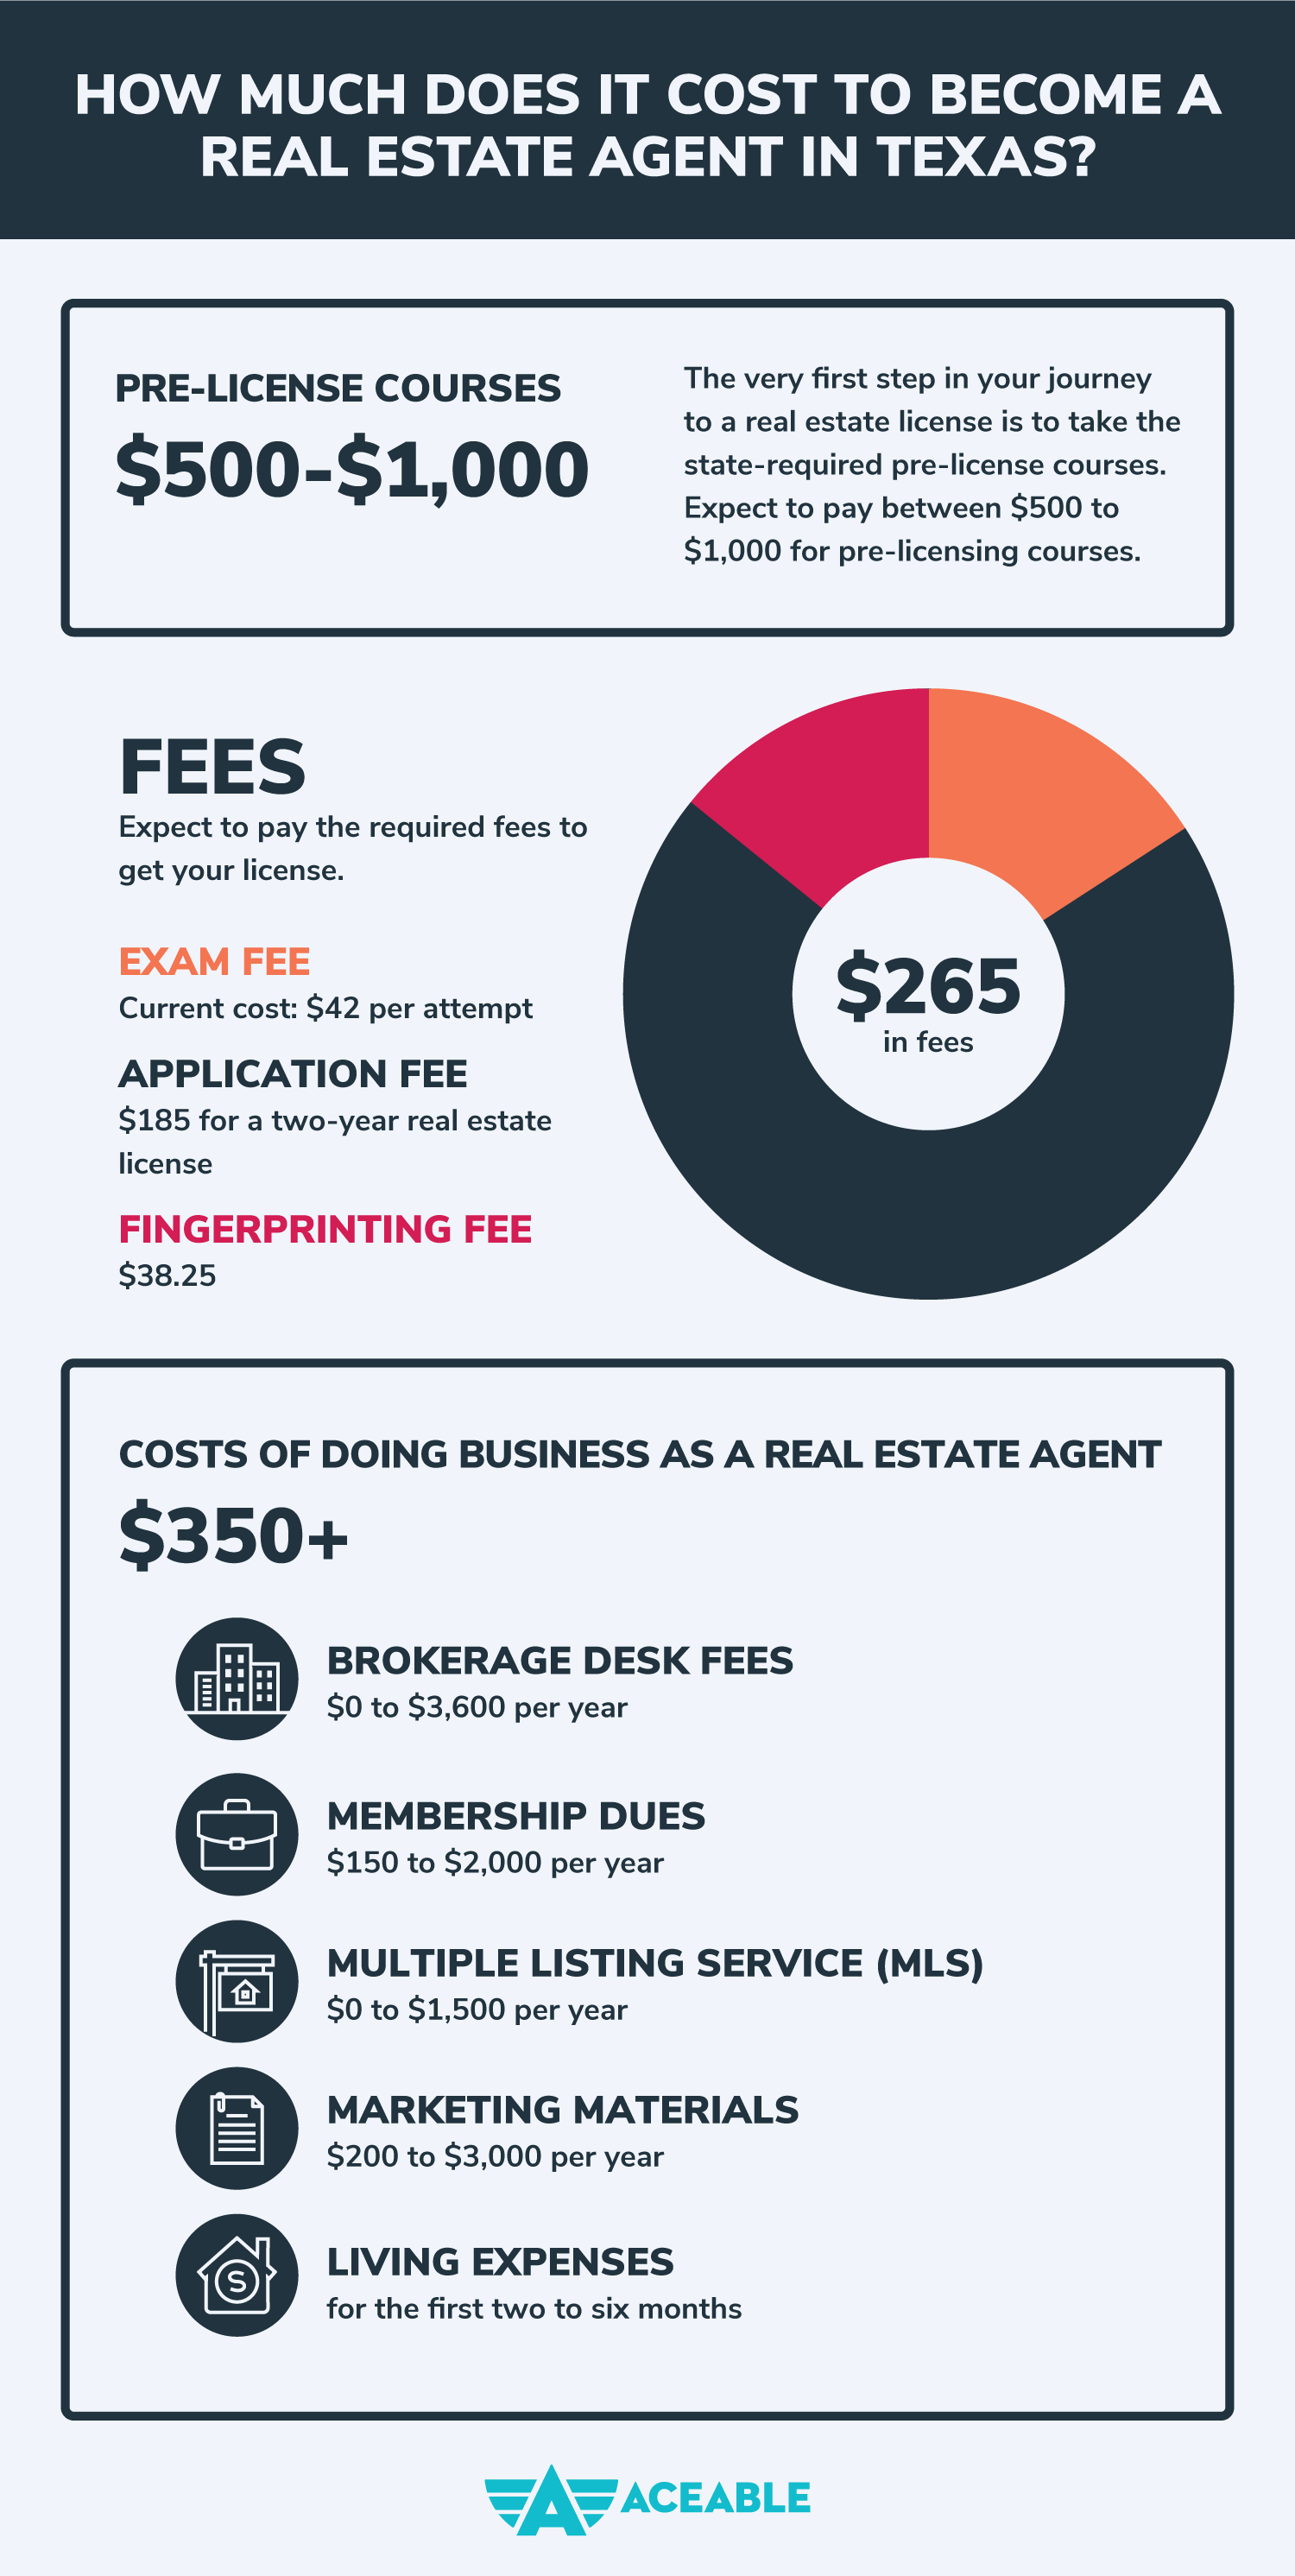 Info graphic breaking down the various costs of being a real estate agent in Texas, including brokerage desk fees, membership dues, multiple listing service, marketing materials, and living expenses